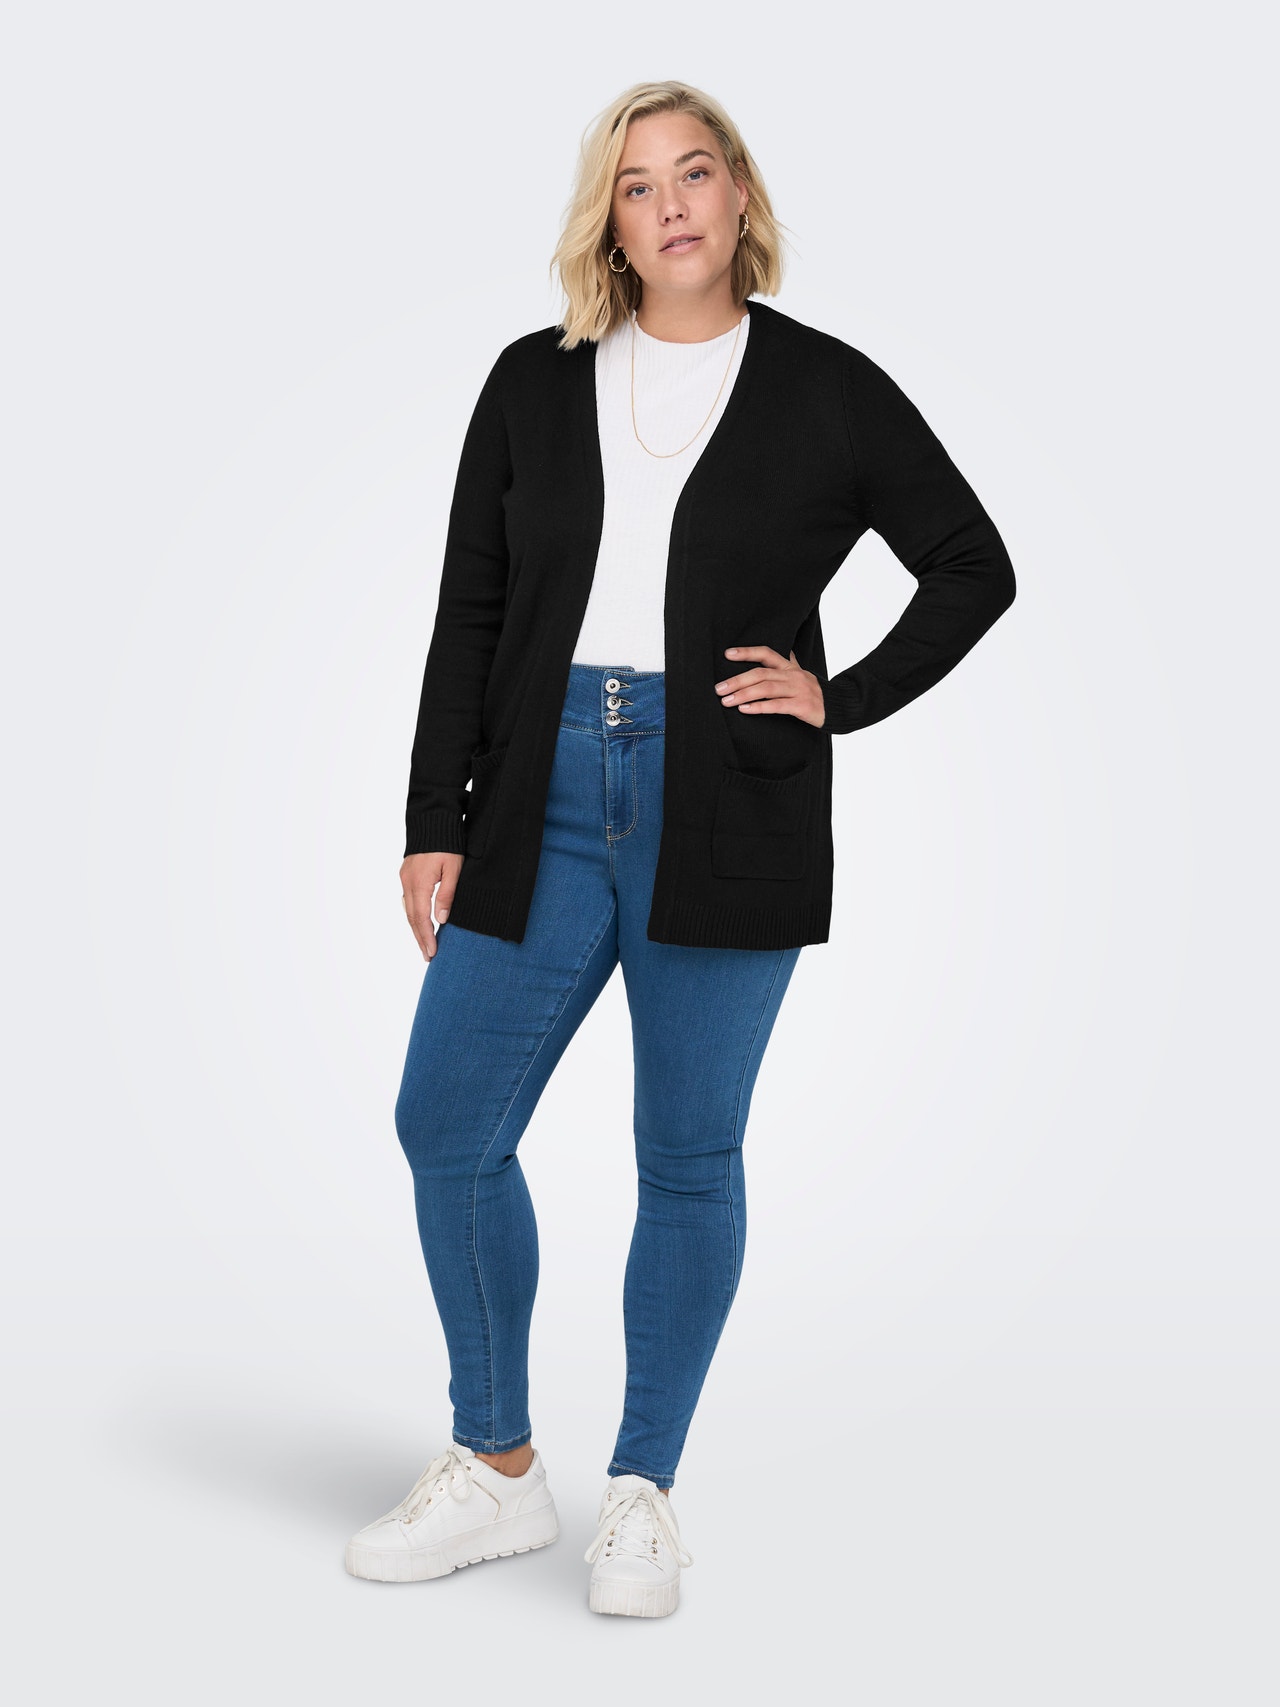 ONLY Curvy open Knitted Cardigan -Black - 15219653